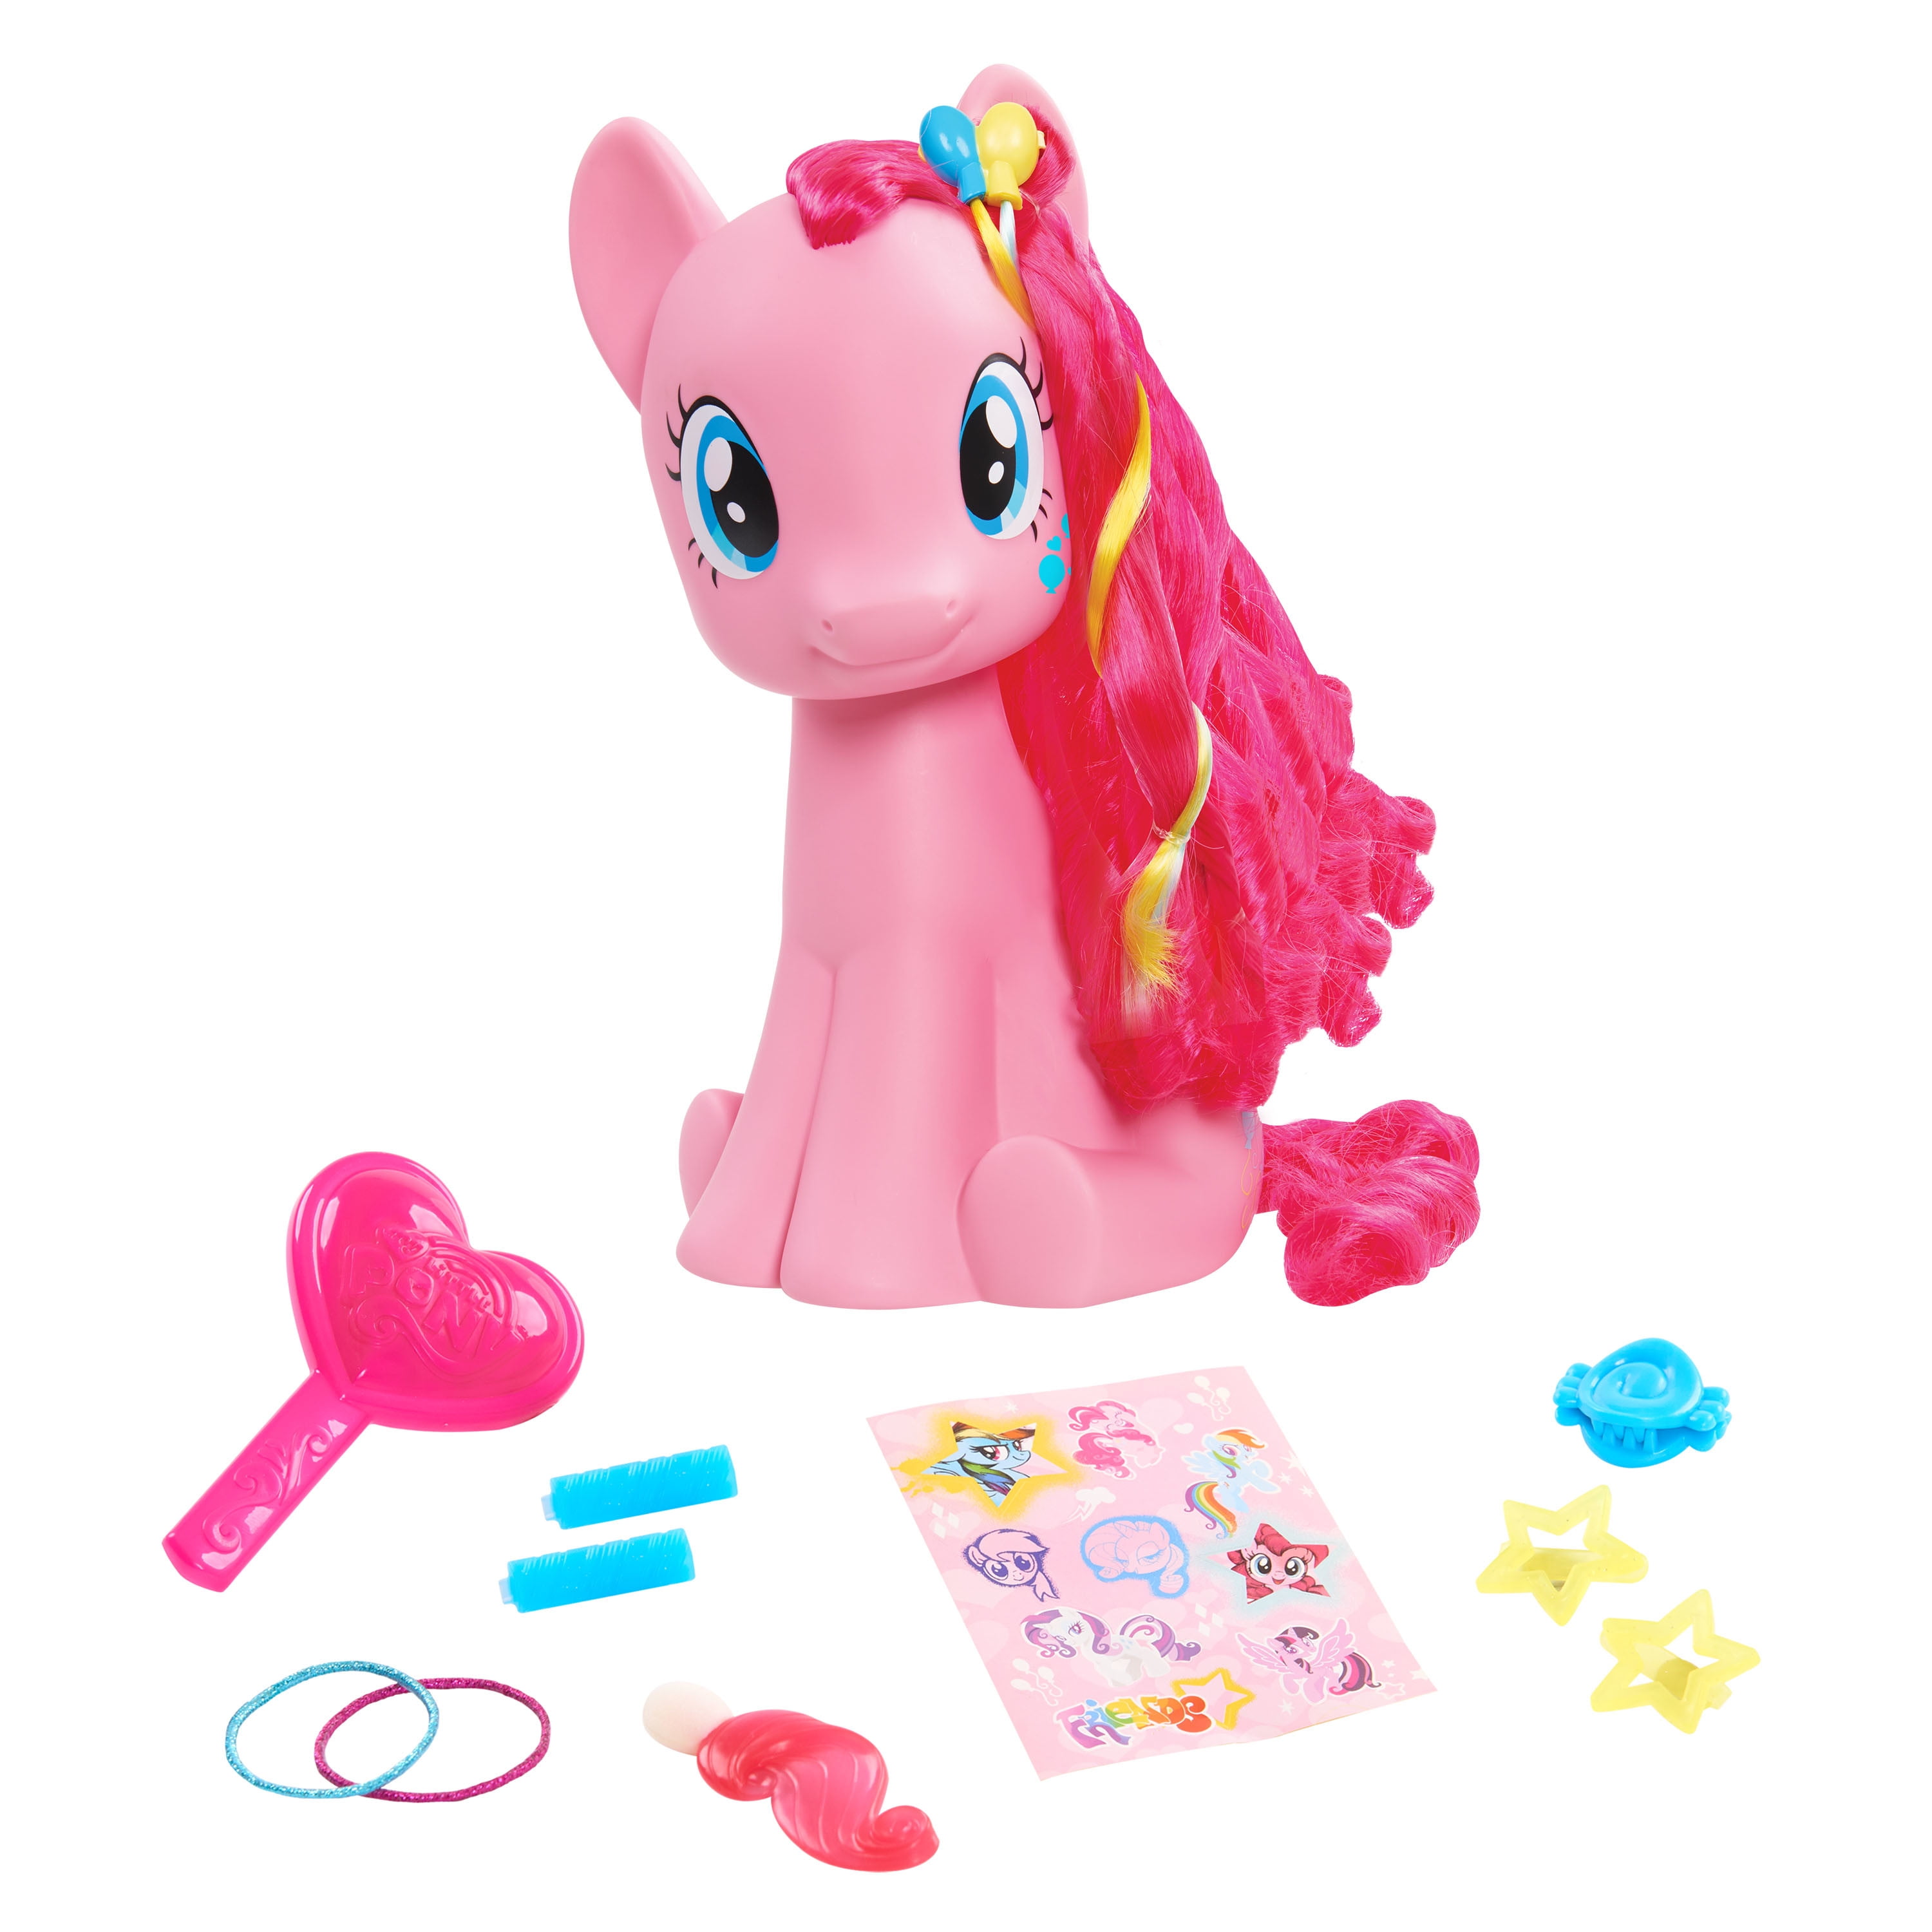 MY LITTLE PONY PINKY PIE  18 INCH VERY STRONG CHAIN  GIFT BOXED BIRTHDAY PARTY 